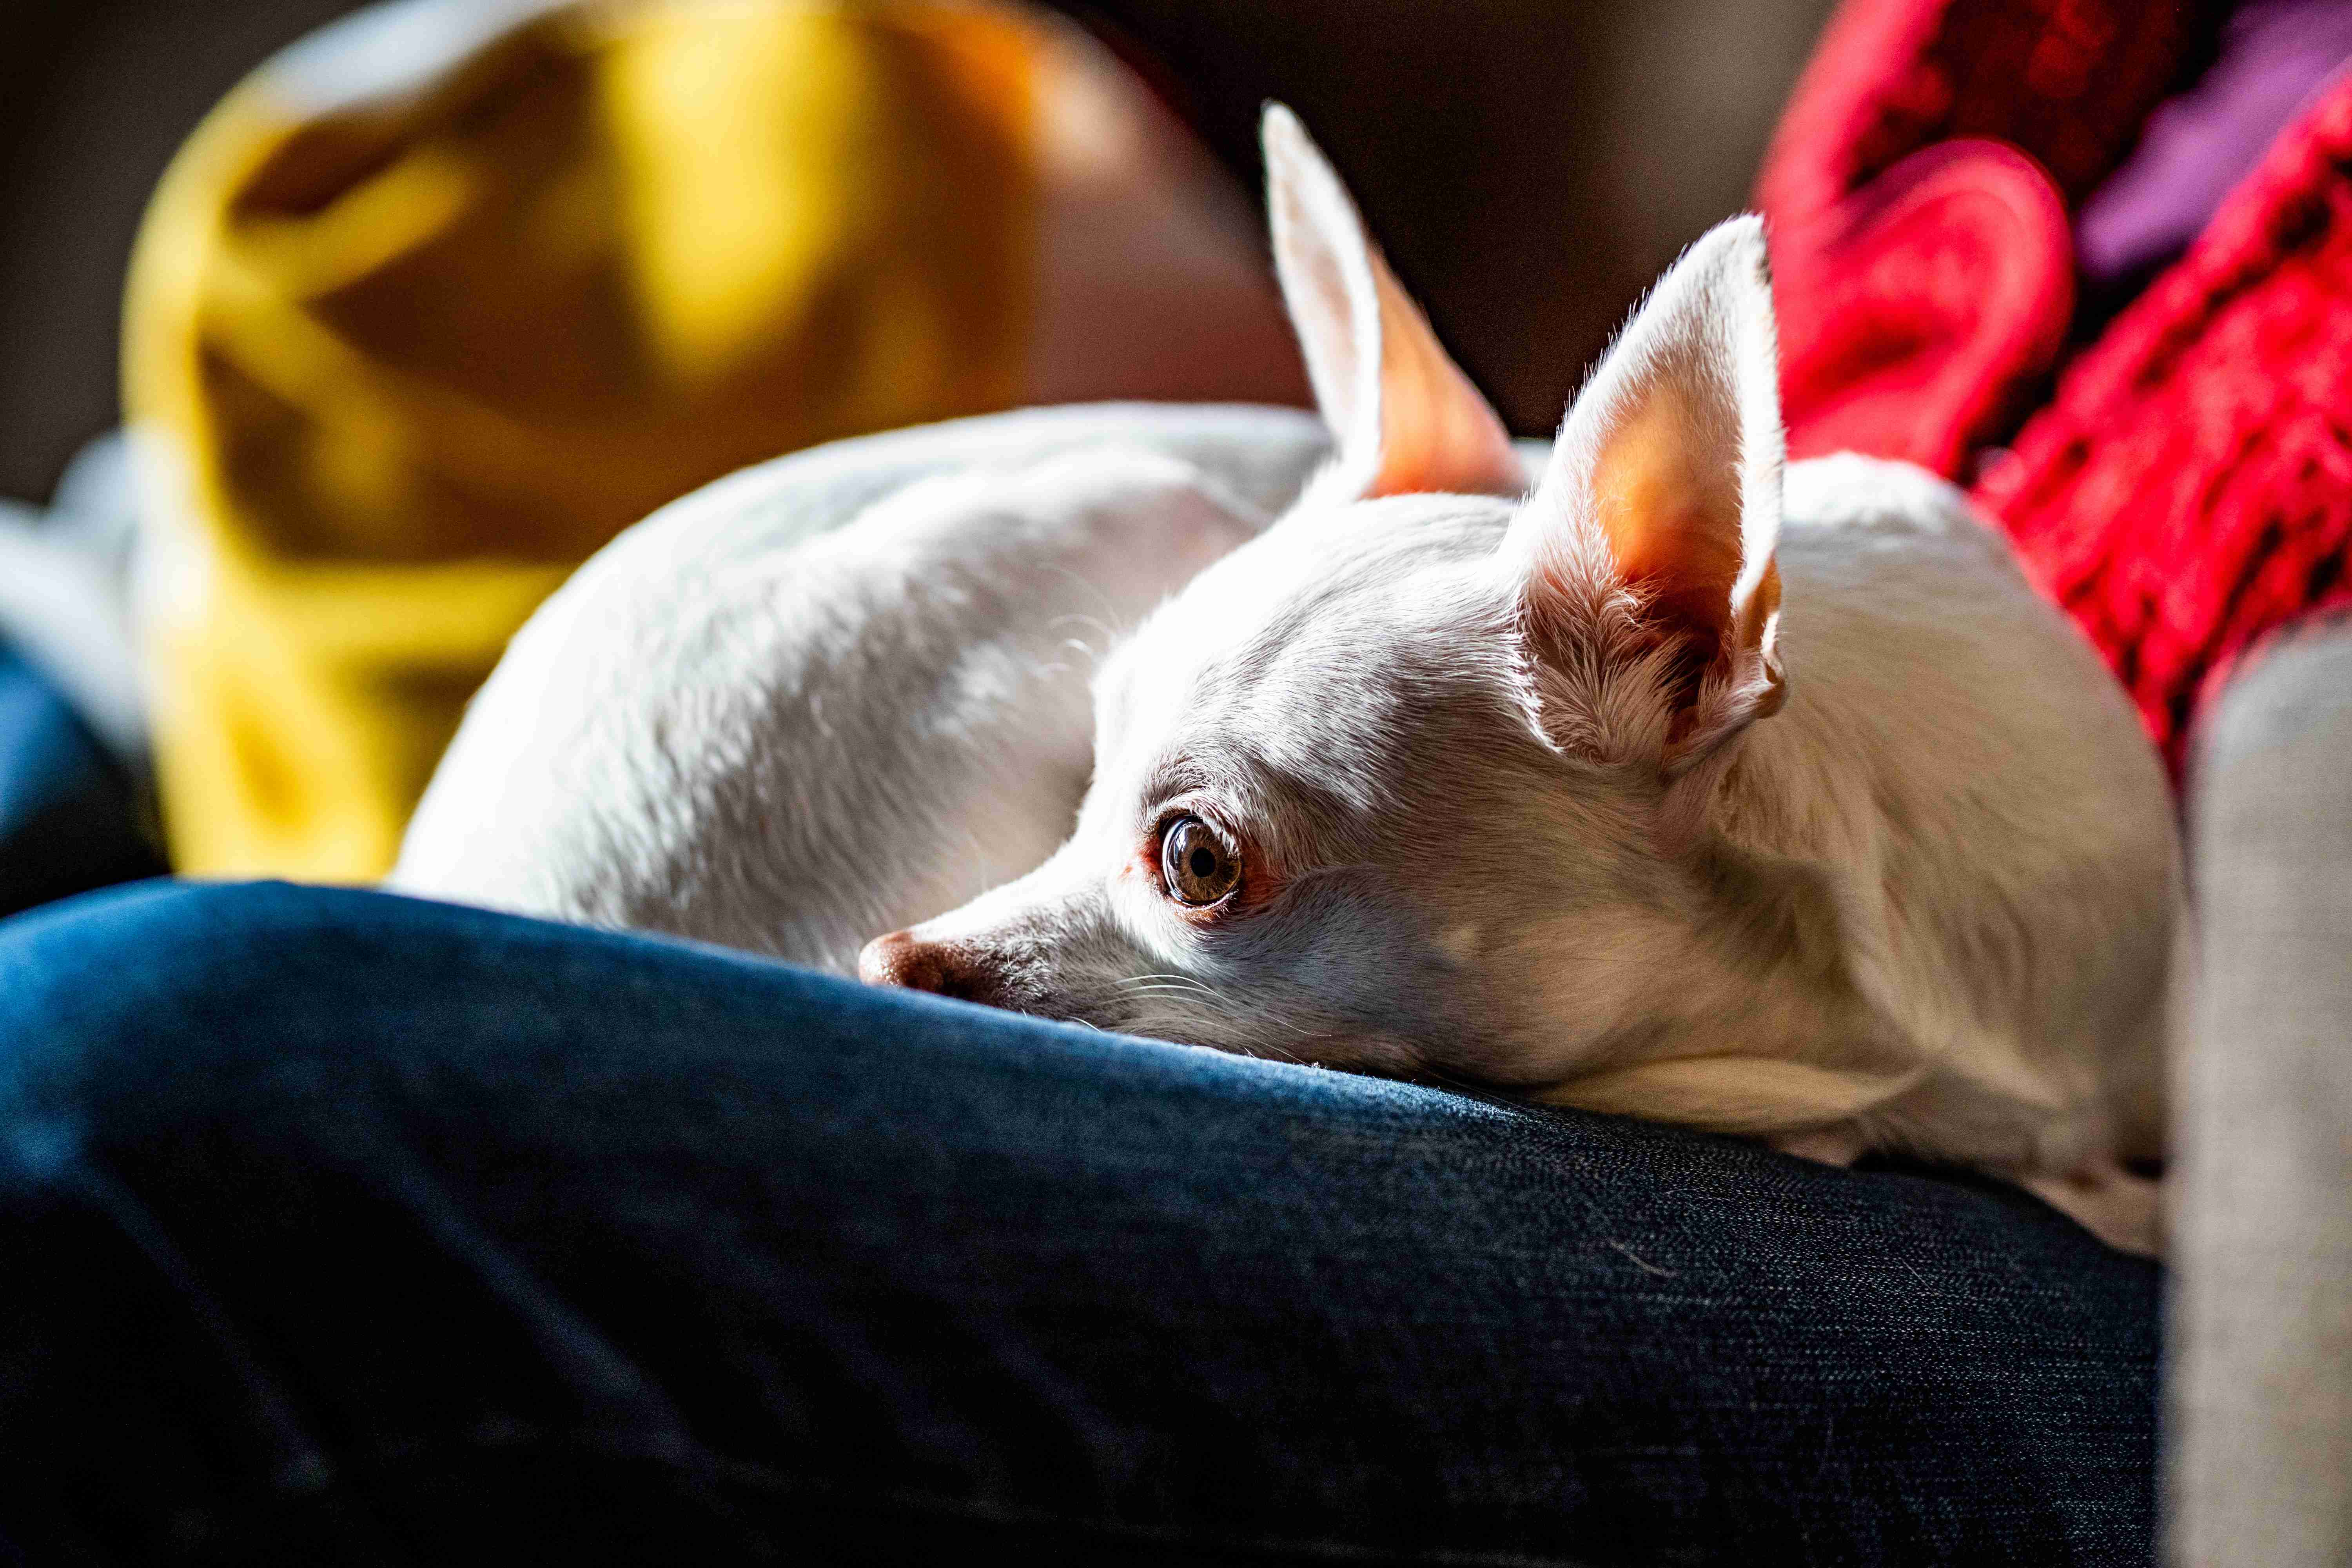 Can anger issues in Chihuahuas be managed through structured routines and schedules?